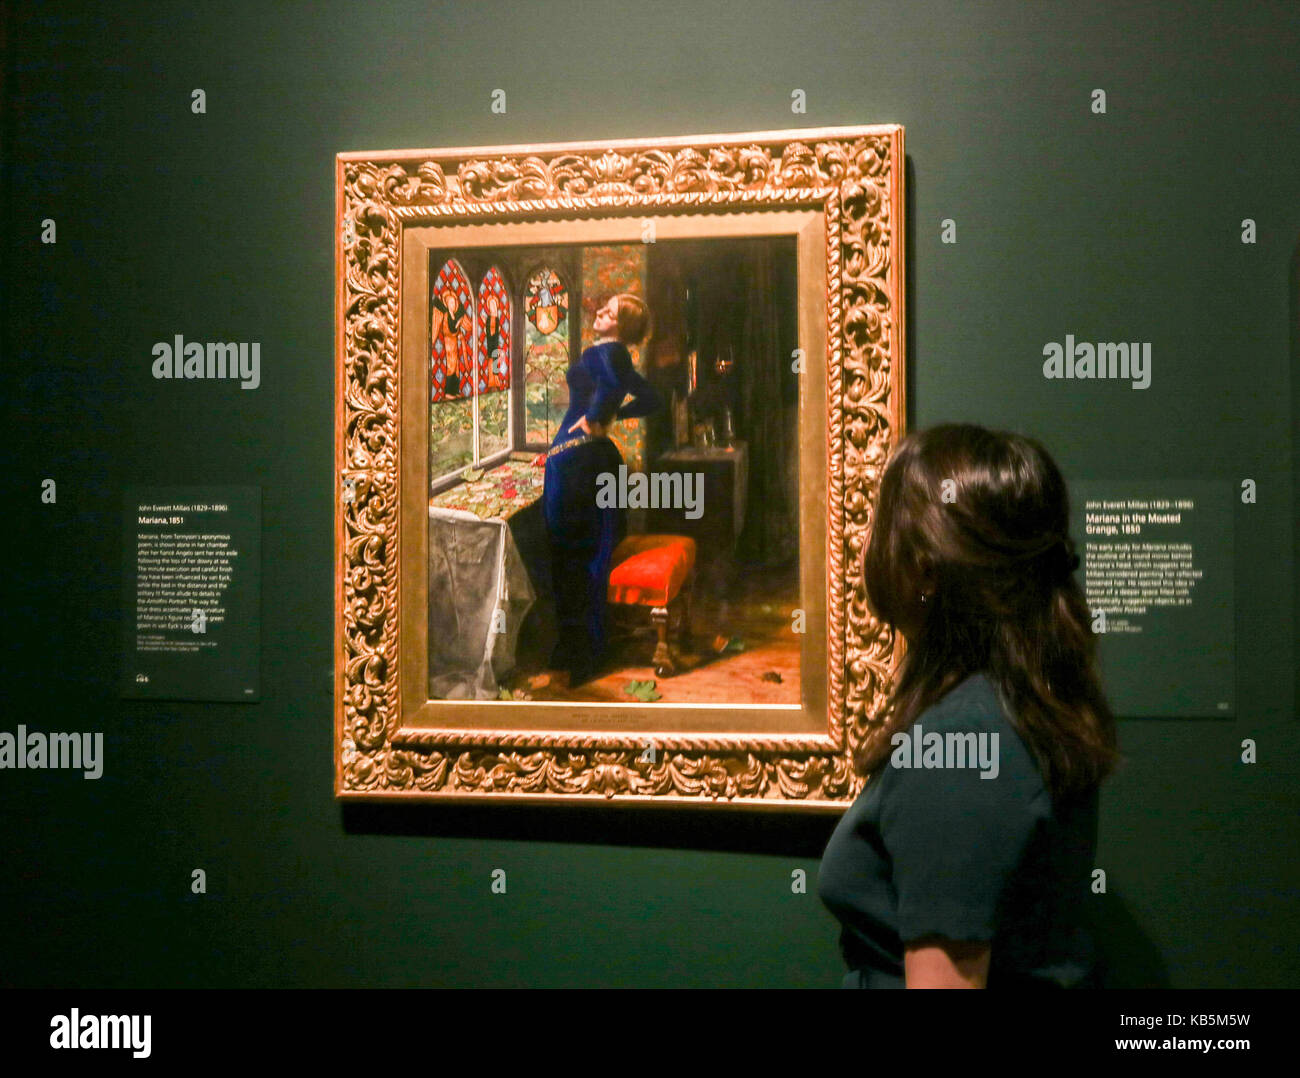 London, UK. 28th Sep, 2017. Mariana by John Everett Millais 1851.Press preview of Fifteenth-century Flemish artist Jan Van Eyck whose 'The Arnolfini Portrait' inspired a new wave of artists called The Pre-Rafaelites Credit: amer ghazzal/Alamy Live News Stock Photo